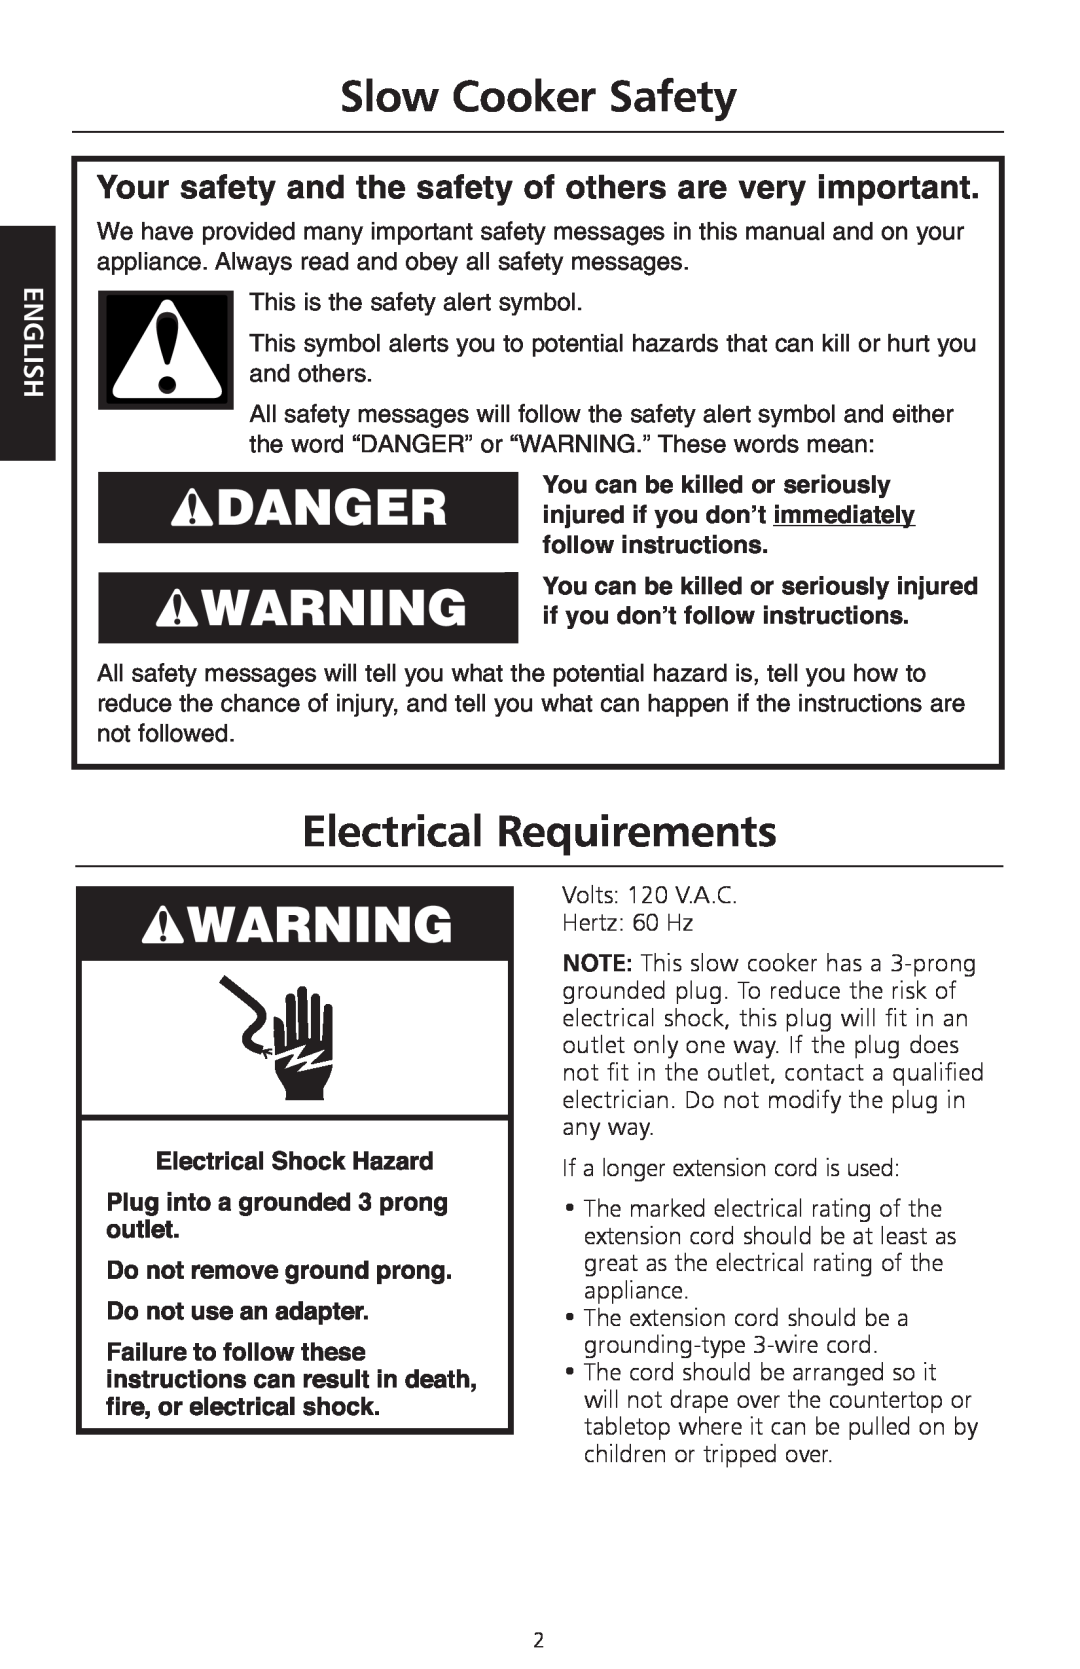 KitchenAid KSC700 manual Slow Cooker Safety, Electrical Requirements, English 